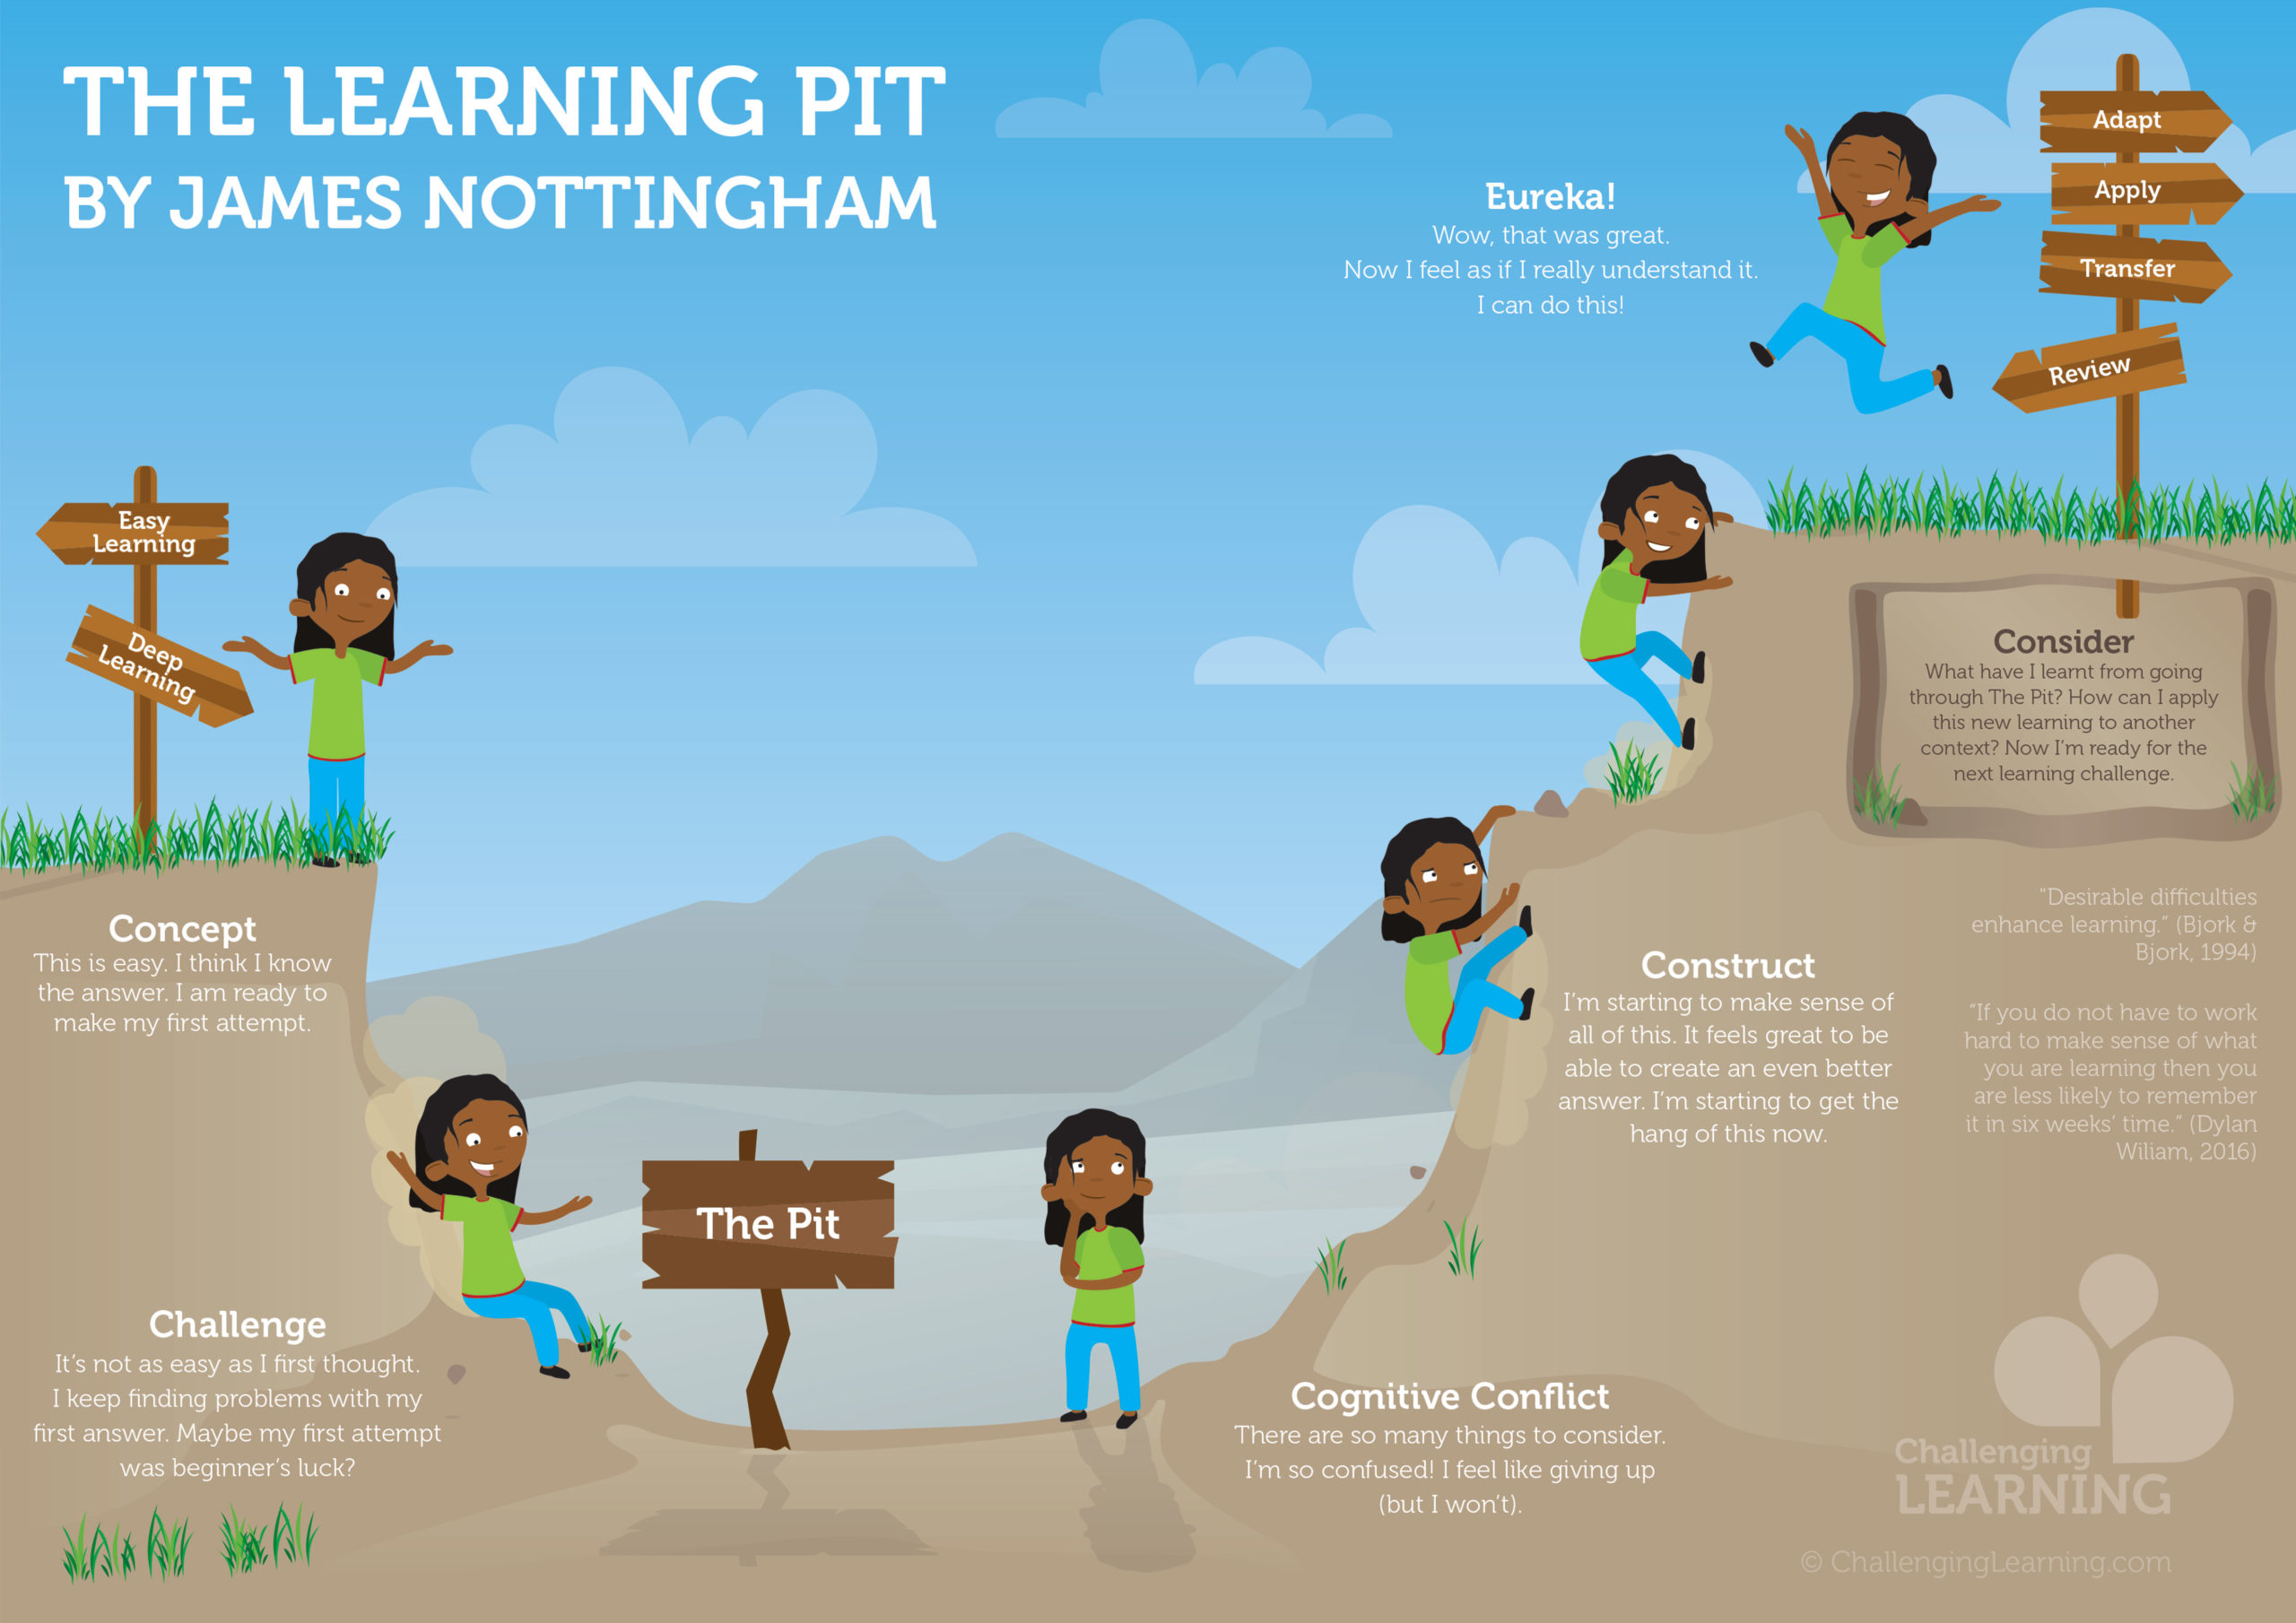 The Learning Pit was created by Nottingham (2007, 2010, 2017) More details at: www.challenginglearning.com/learning-pit